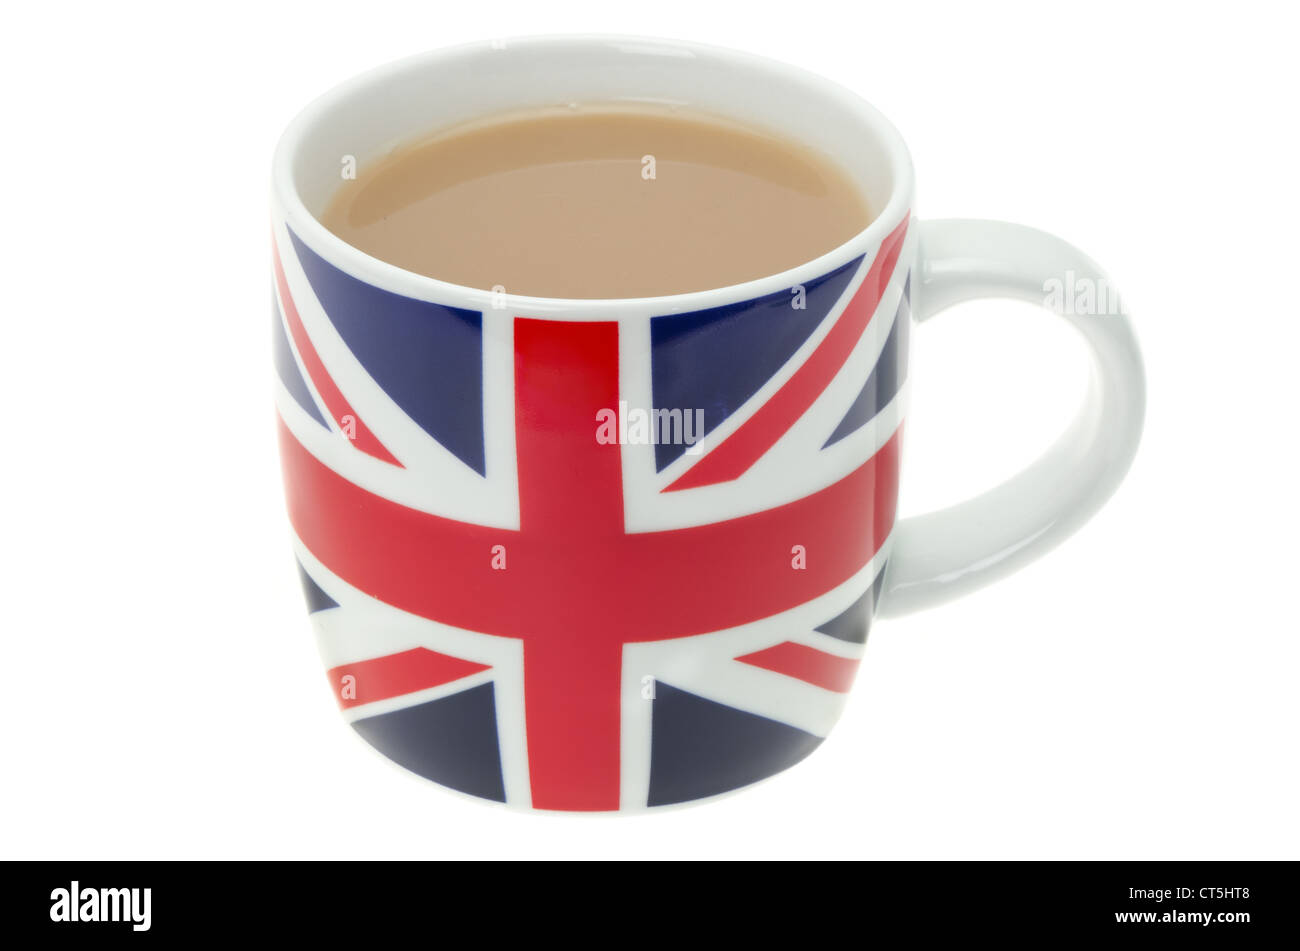 A mug decorated with a British flag 'Union Jack' and full of hot tea - studio shot with a white background. Stock Photo